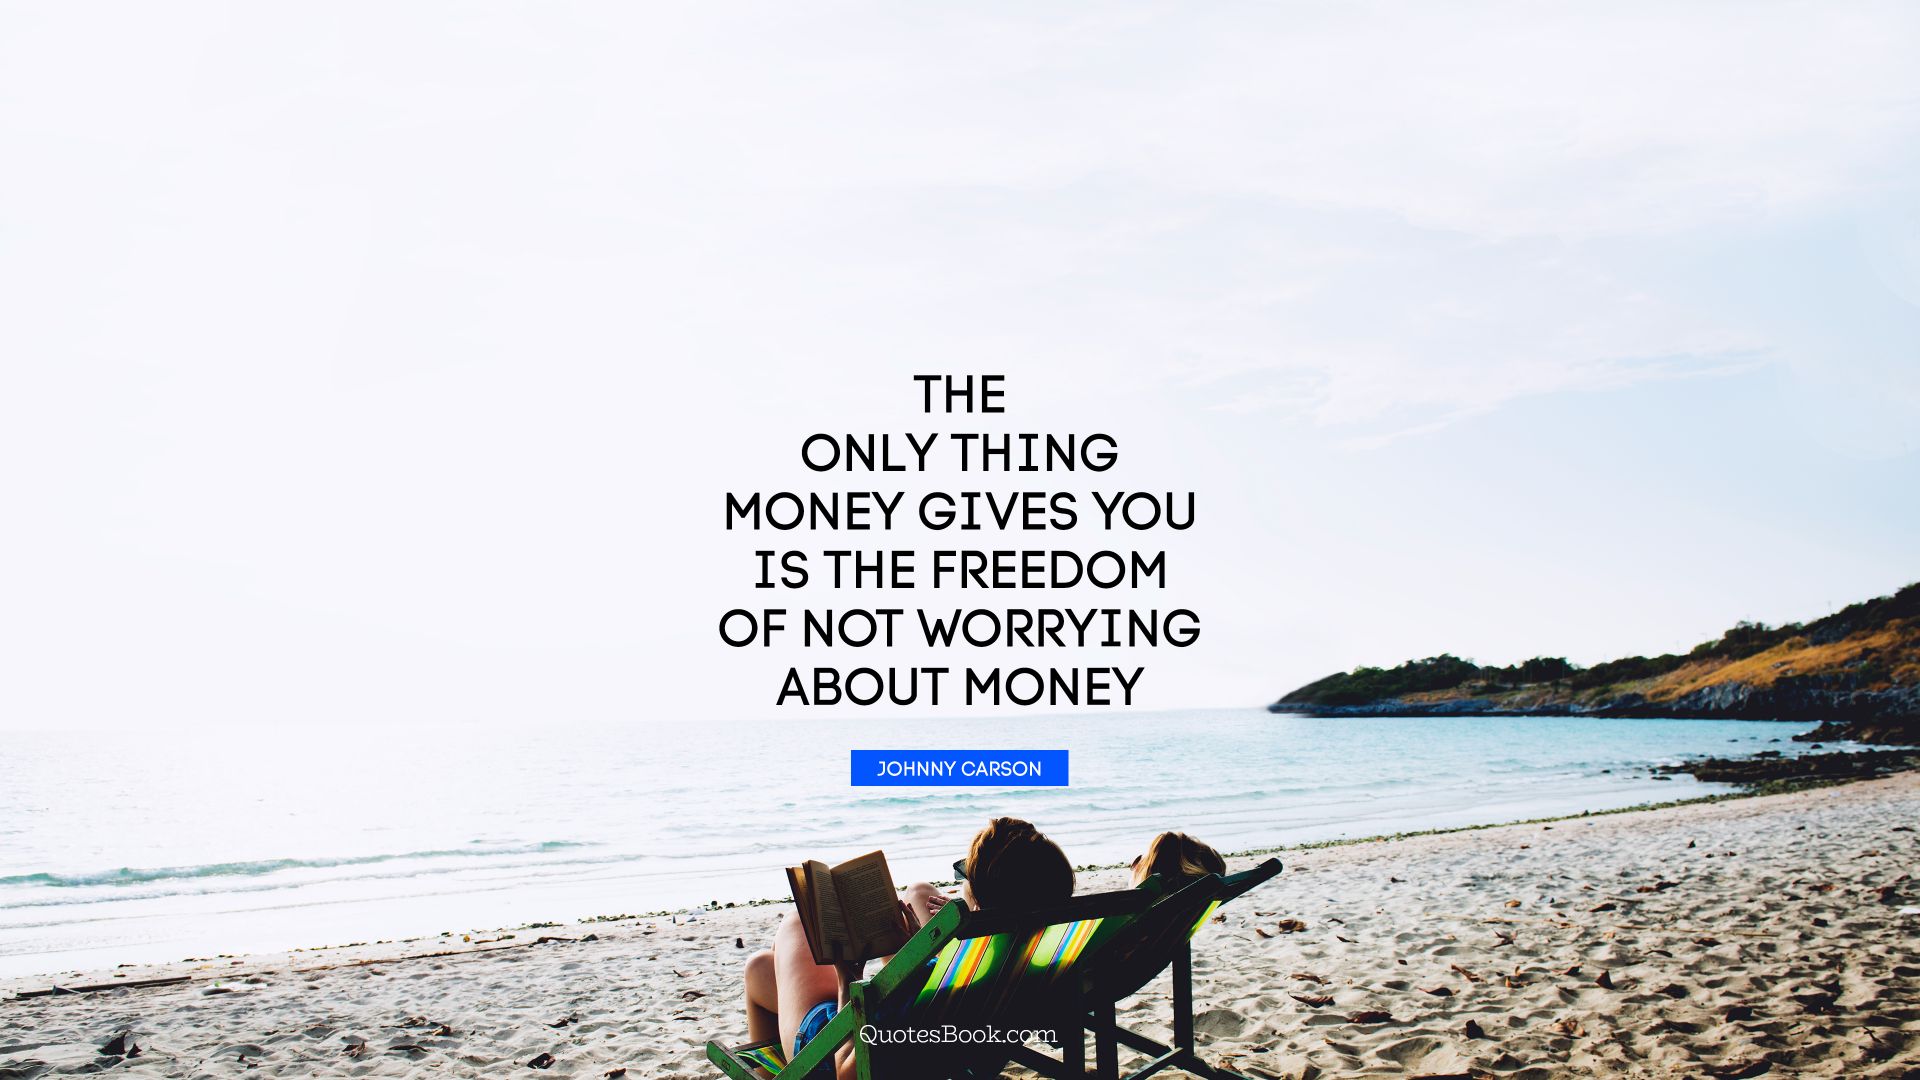 The only thing money gives you is the freedom of not worrying about money. - Quote by Johnny Carson